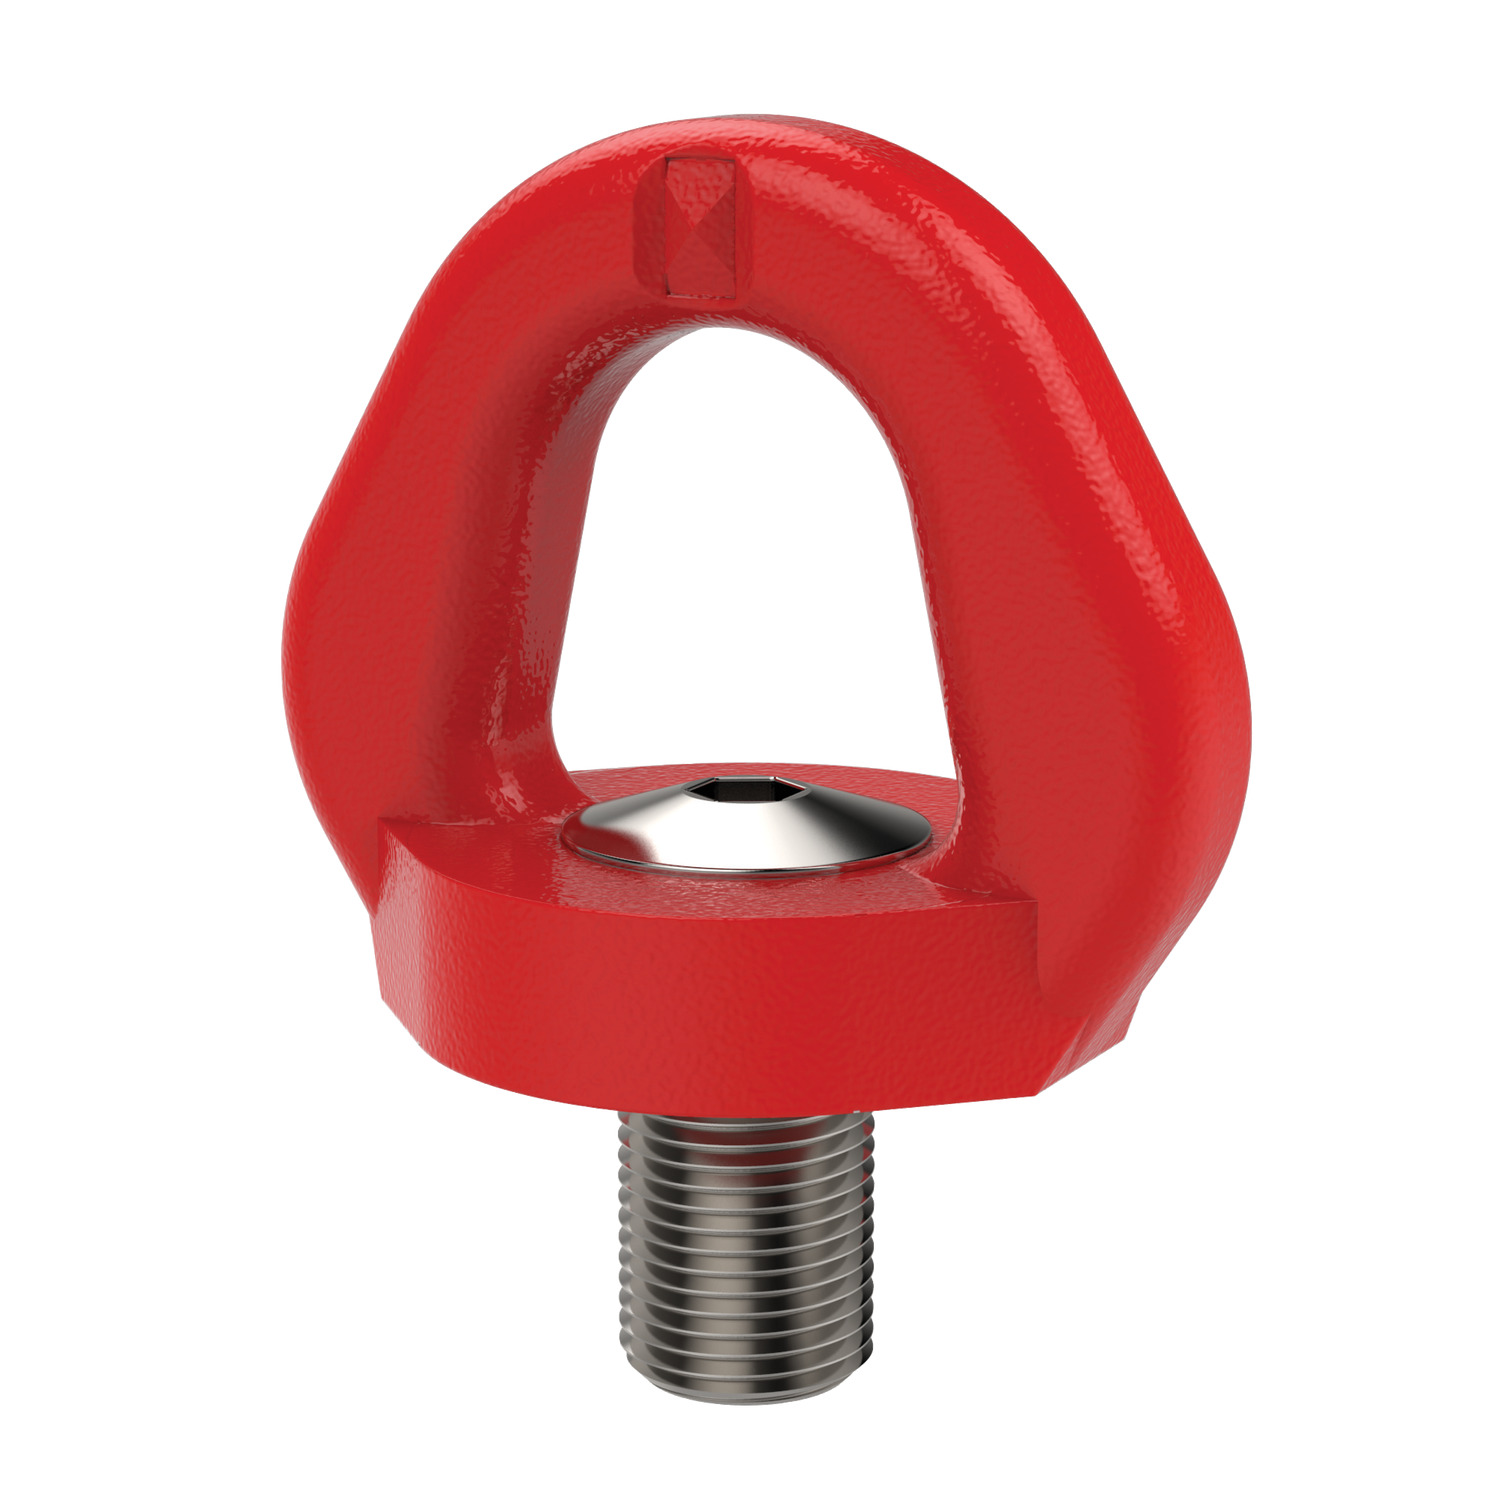 Swivel Eye Bolts Male Available in M8 to M48 threads in male and female thread versions, load ratings to up to 15 tons per ring. Allows rotation of the lifting bolts in a single axis to align with the lift.